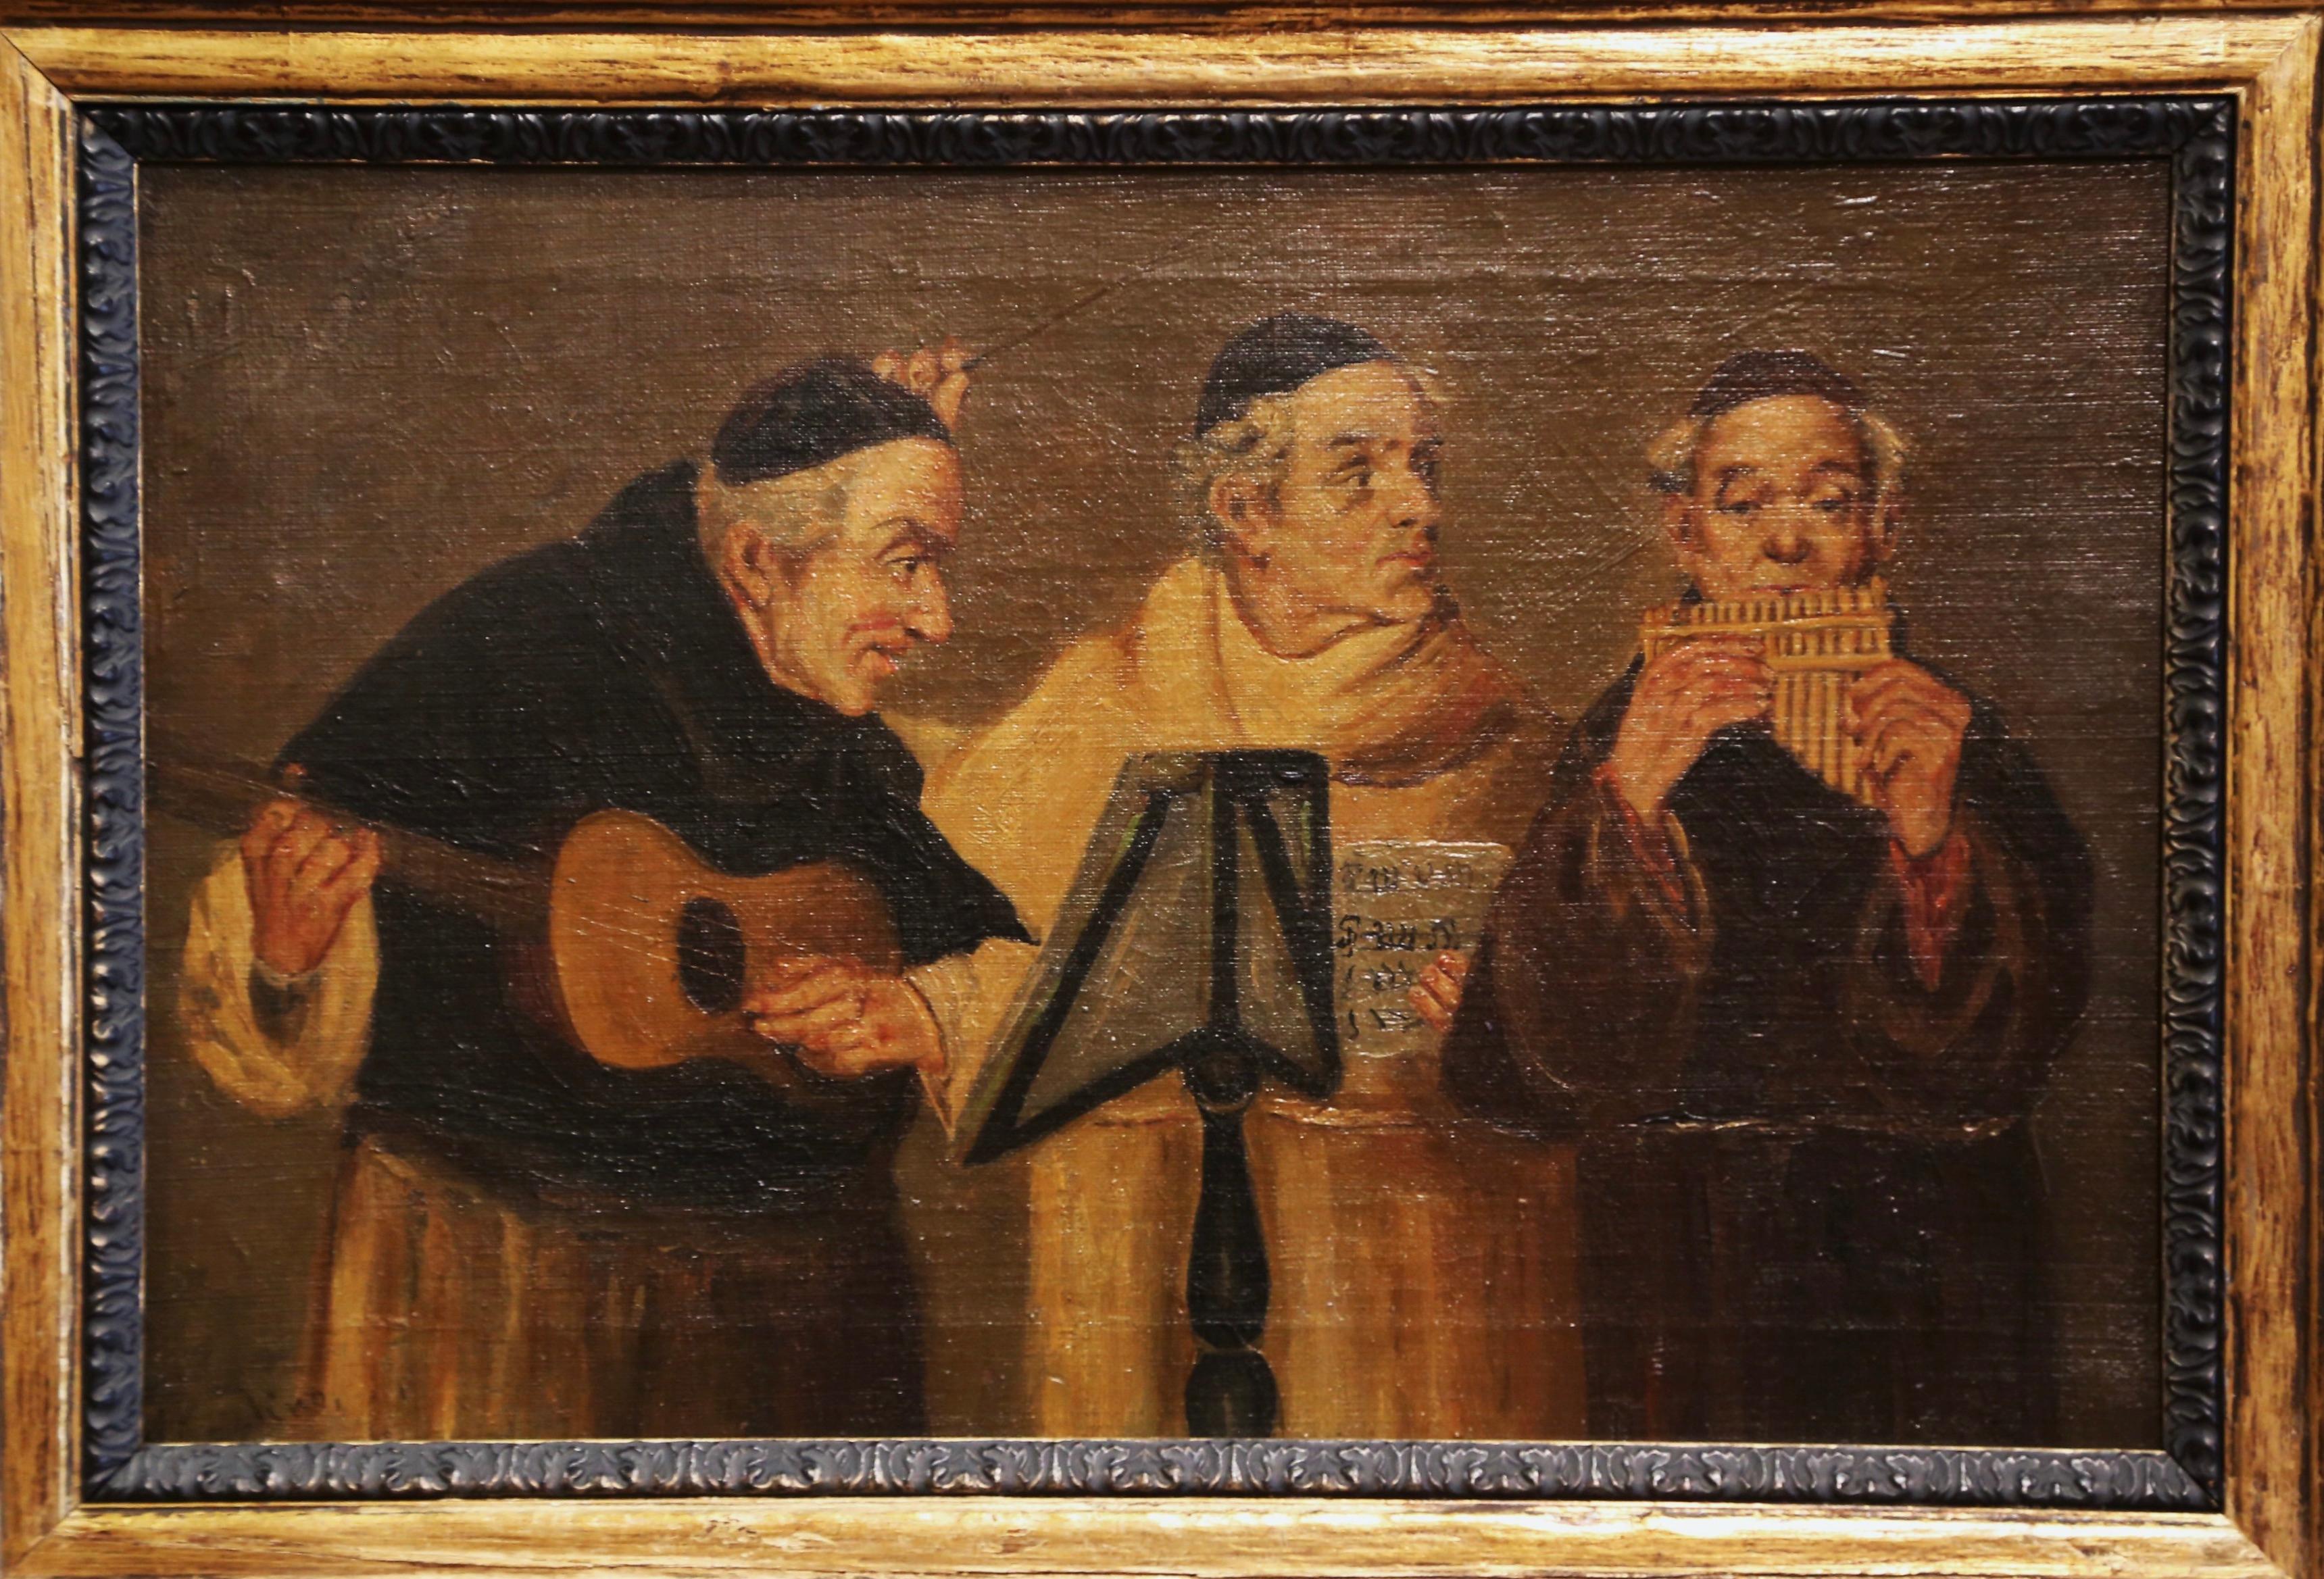 Created in France, circa 1880 and set in a carved gilt frame, the antique painting depicts three jovial monks playing music instruments in the style of Eduard Von Grutzner. The art work is signed in the lower left corner by the artist, but